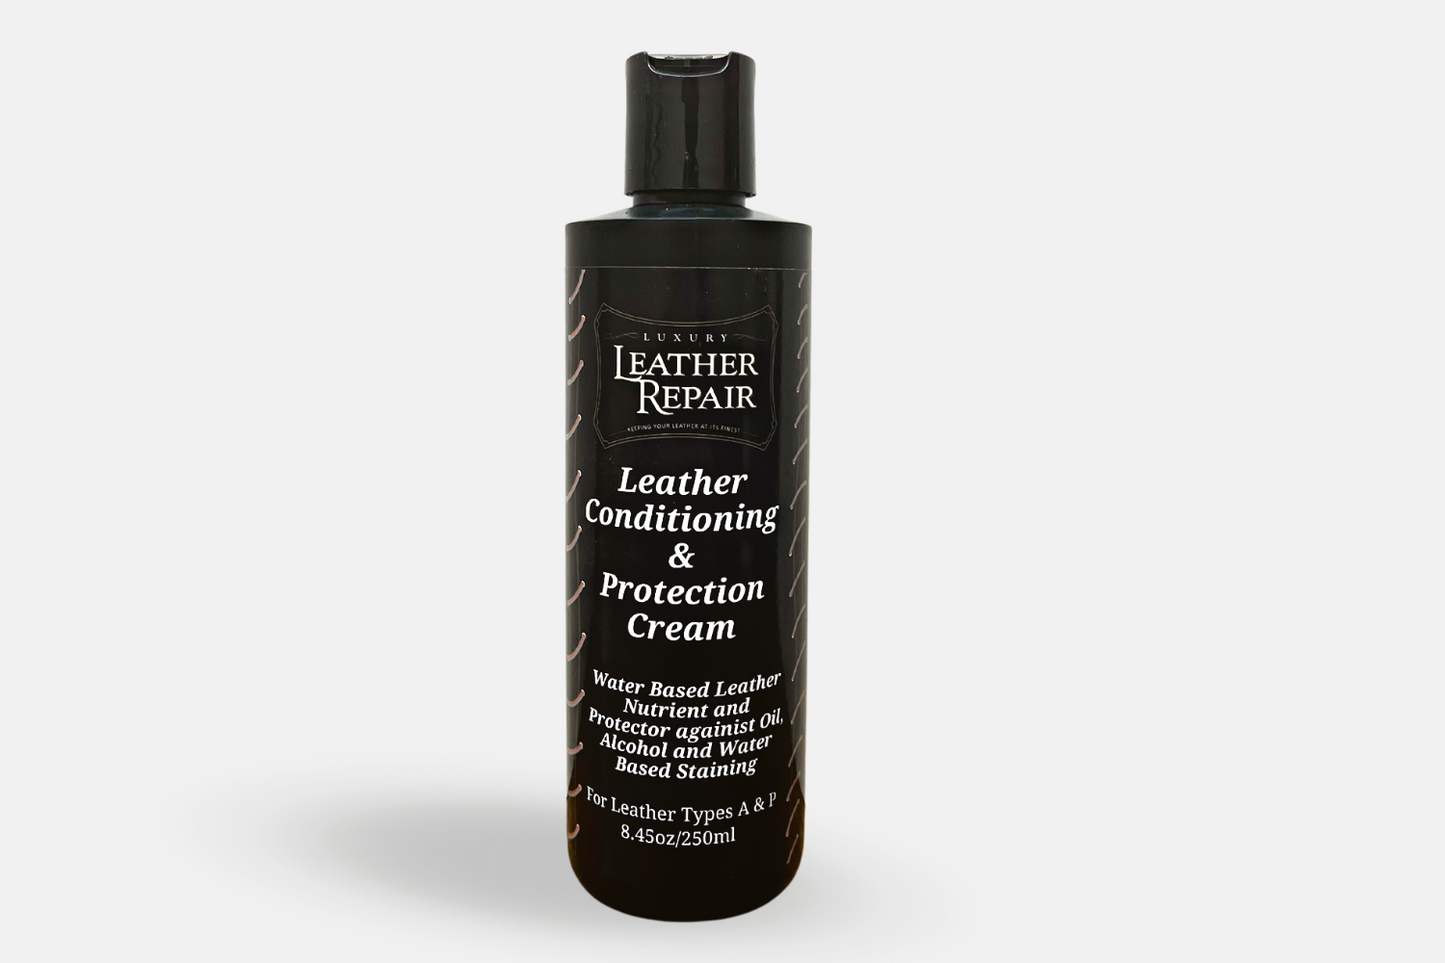 Leather Conditioning & Protection Cream